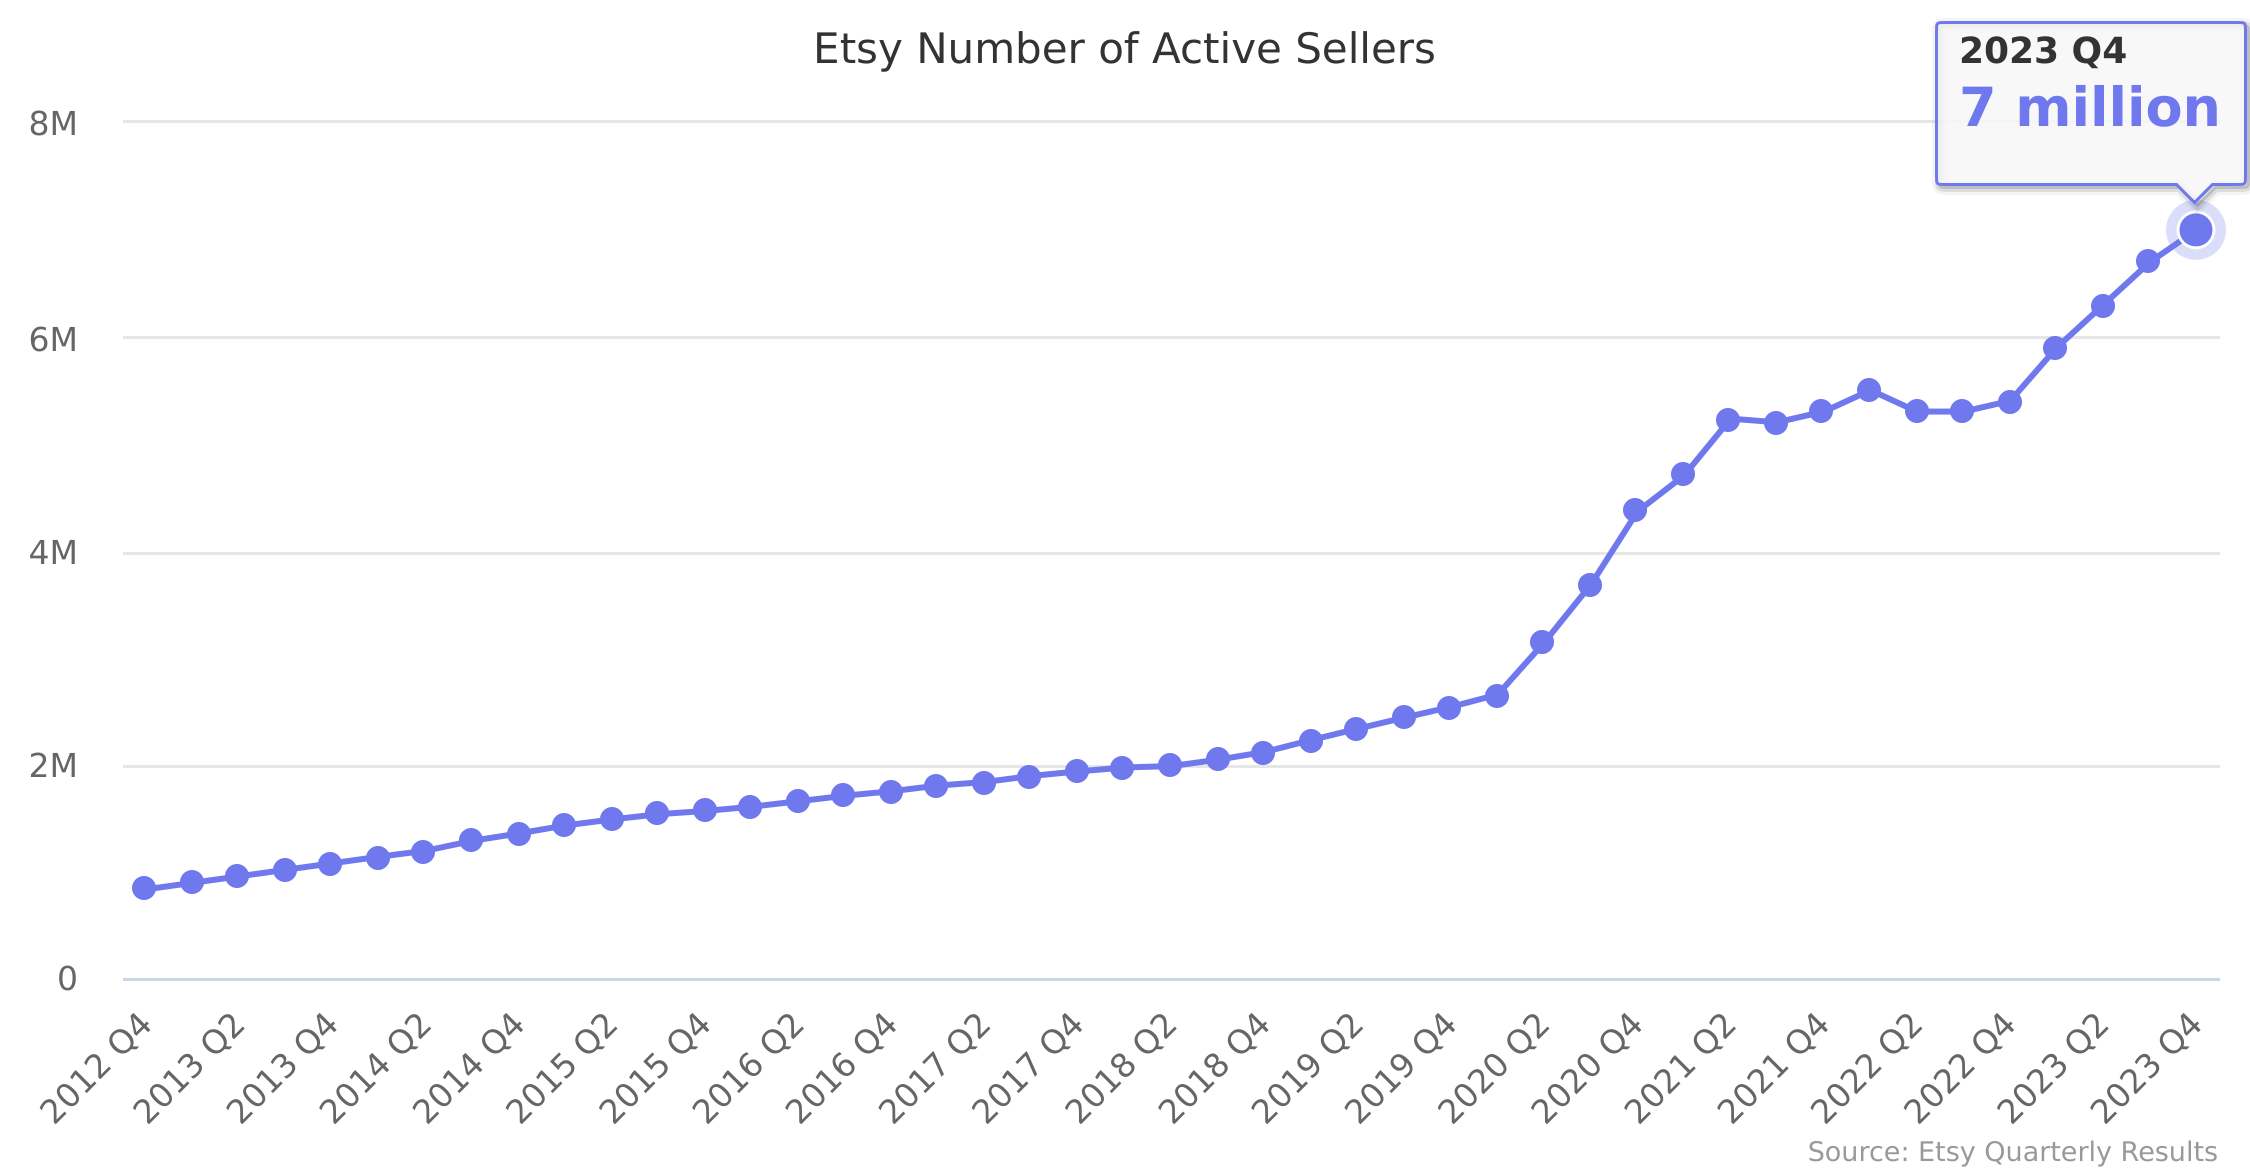 Etsy Number of Active Sellers 2012-2022